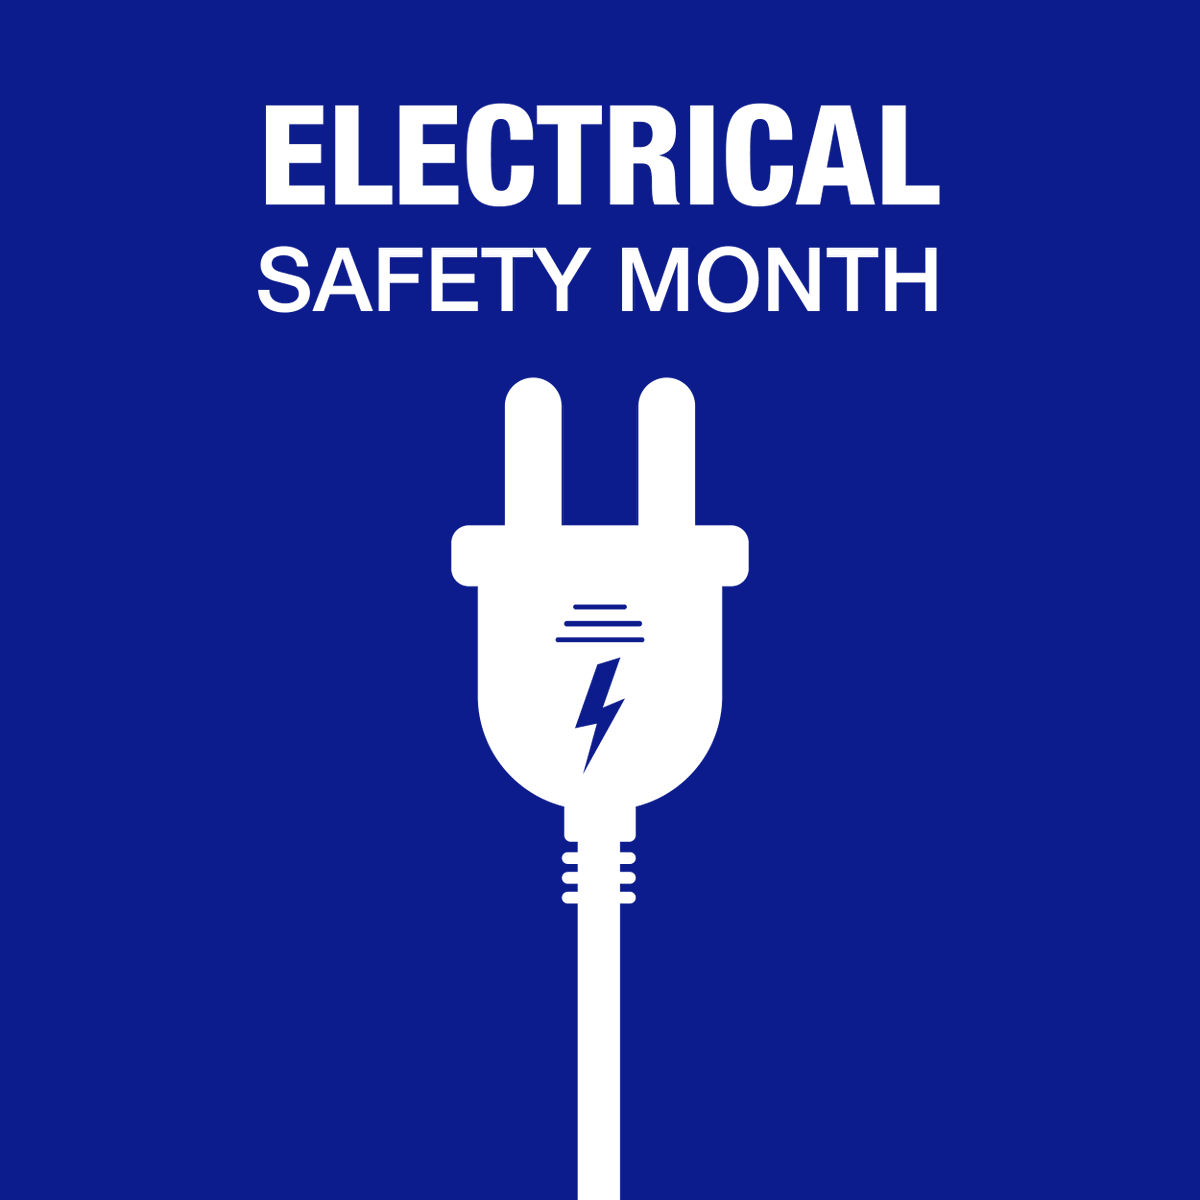 May is Electrical Safety Month! Follow us all month for safety tips! #electricalsafety #safetymonth #electricalsafetymonth